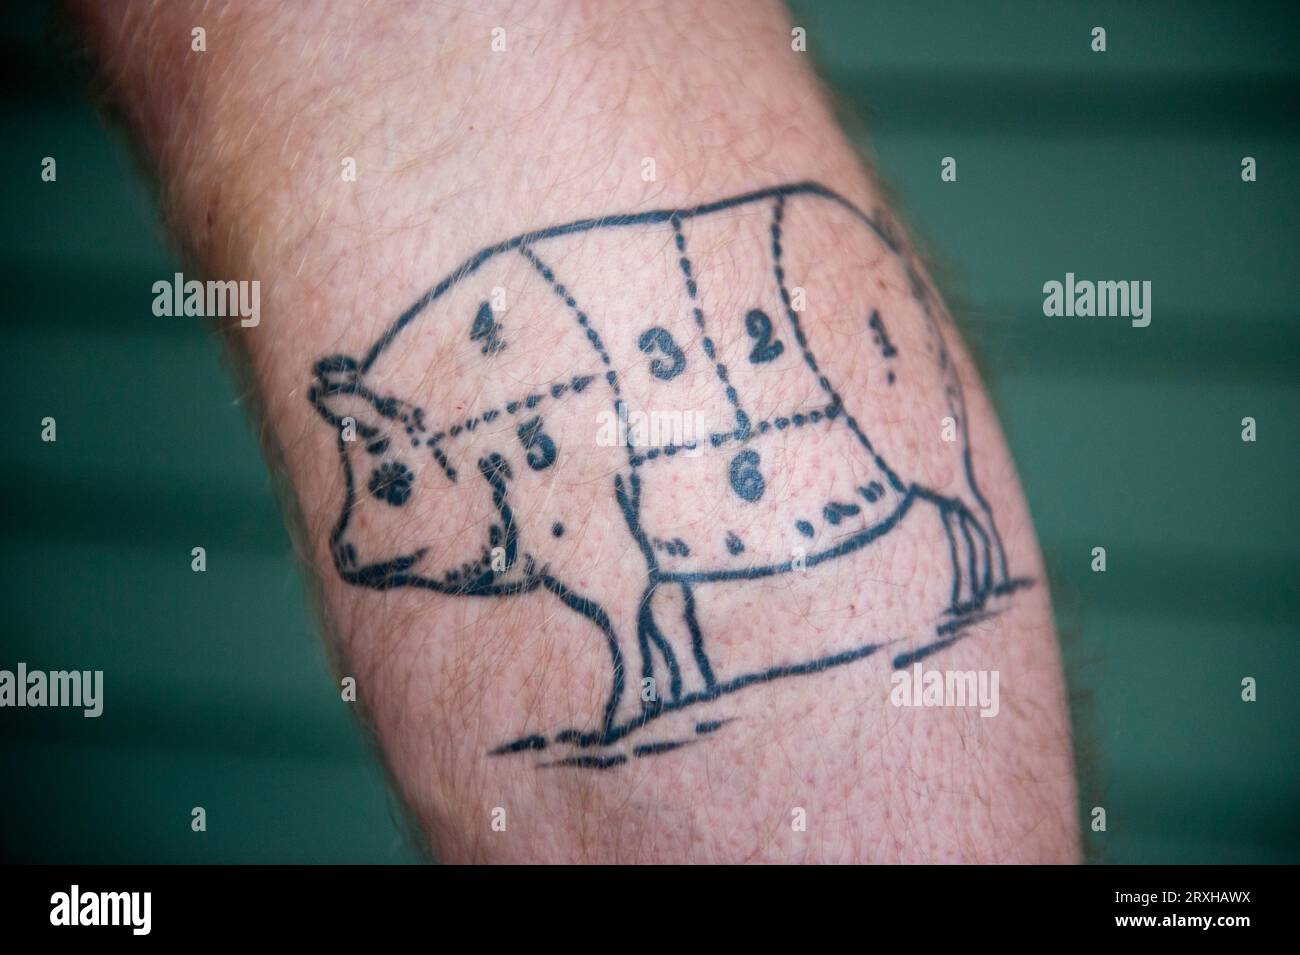 Pig in a cup by Howard Bell (PORTLAND) : Tattoos